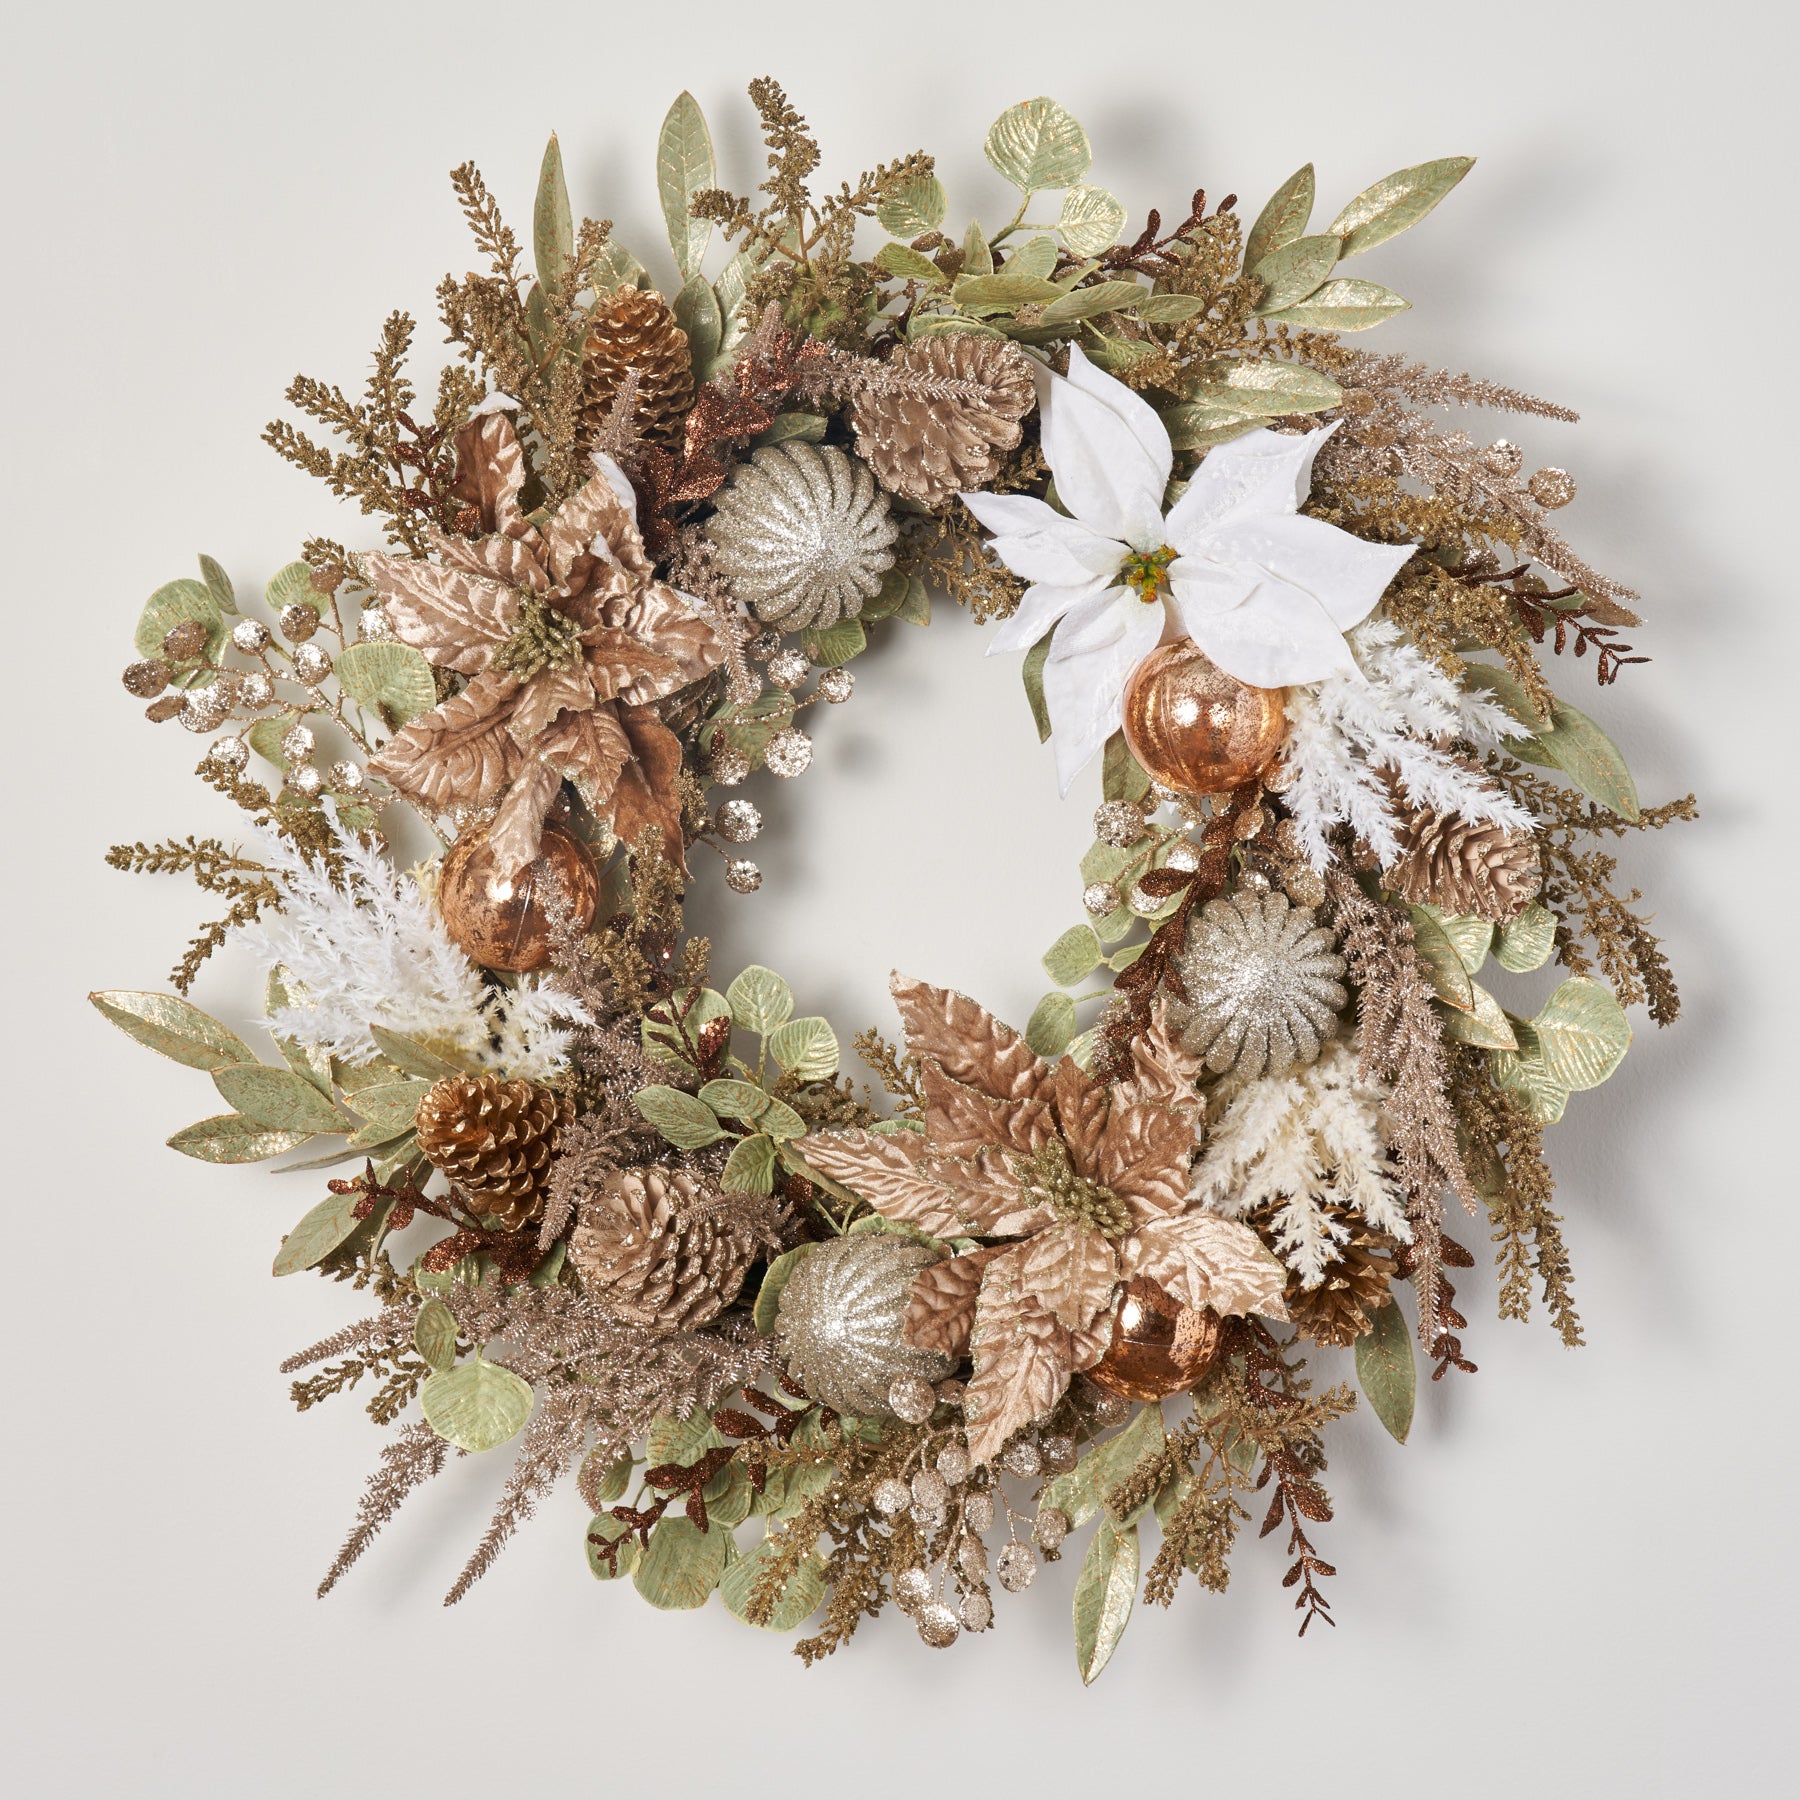 Iced Winter Pine & Eucalyptus with Country Twig Shimmering Holiday Arr –  Darby Creek Trading